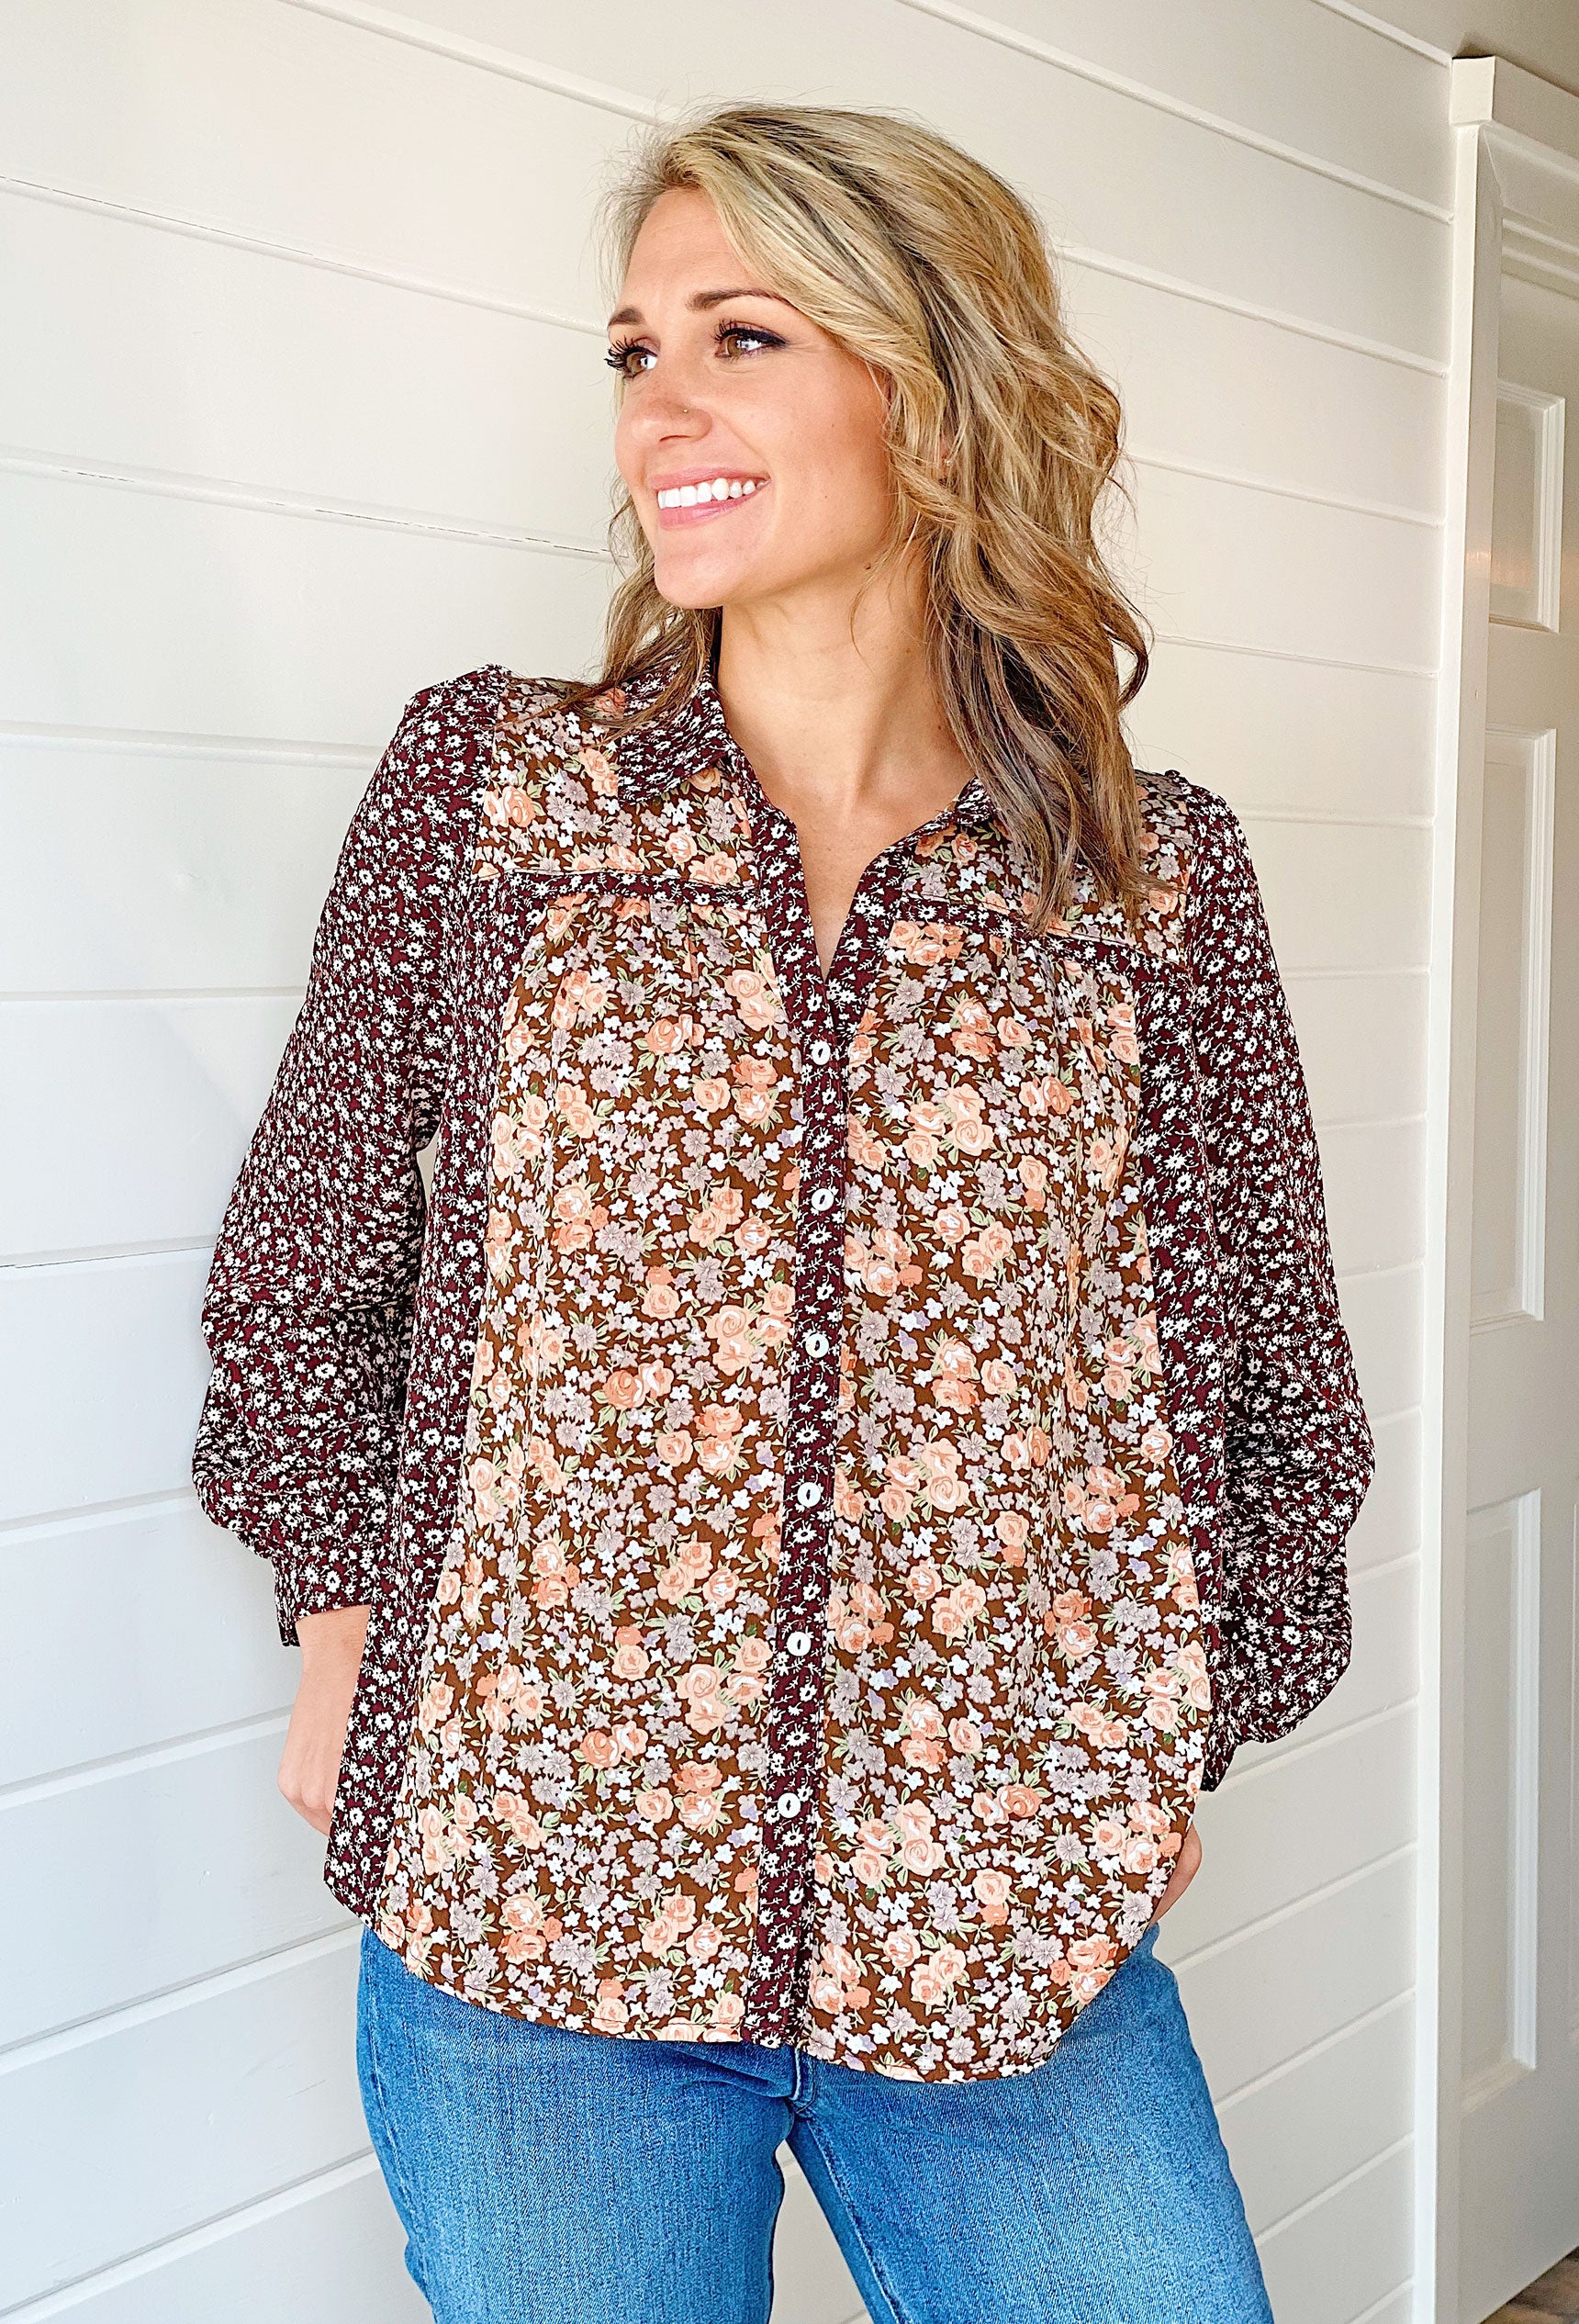 Chasing Dreams Floral Button Up Top, floral button up top, collared neckline, two floral patterns